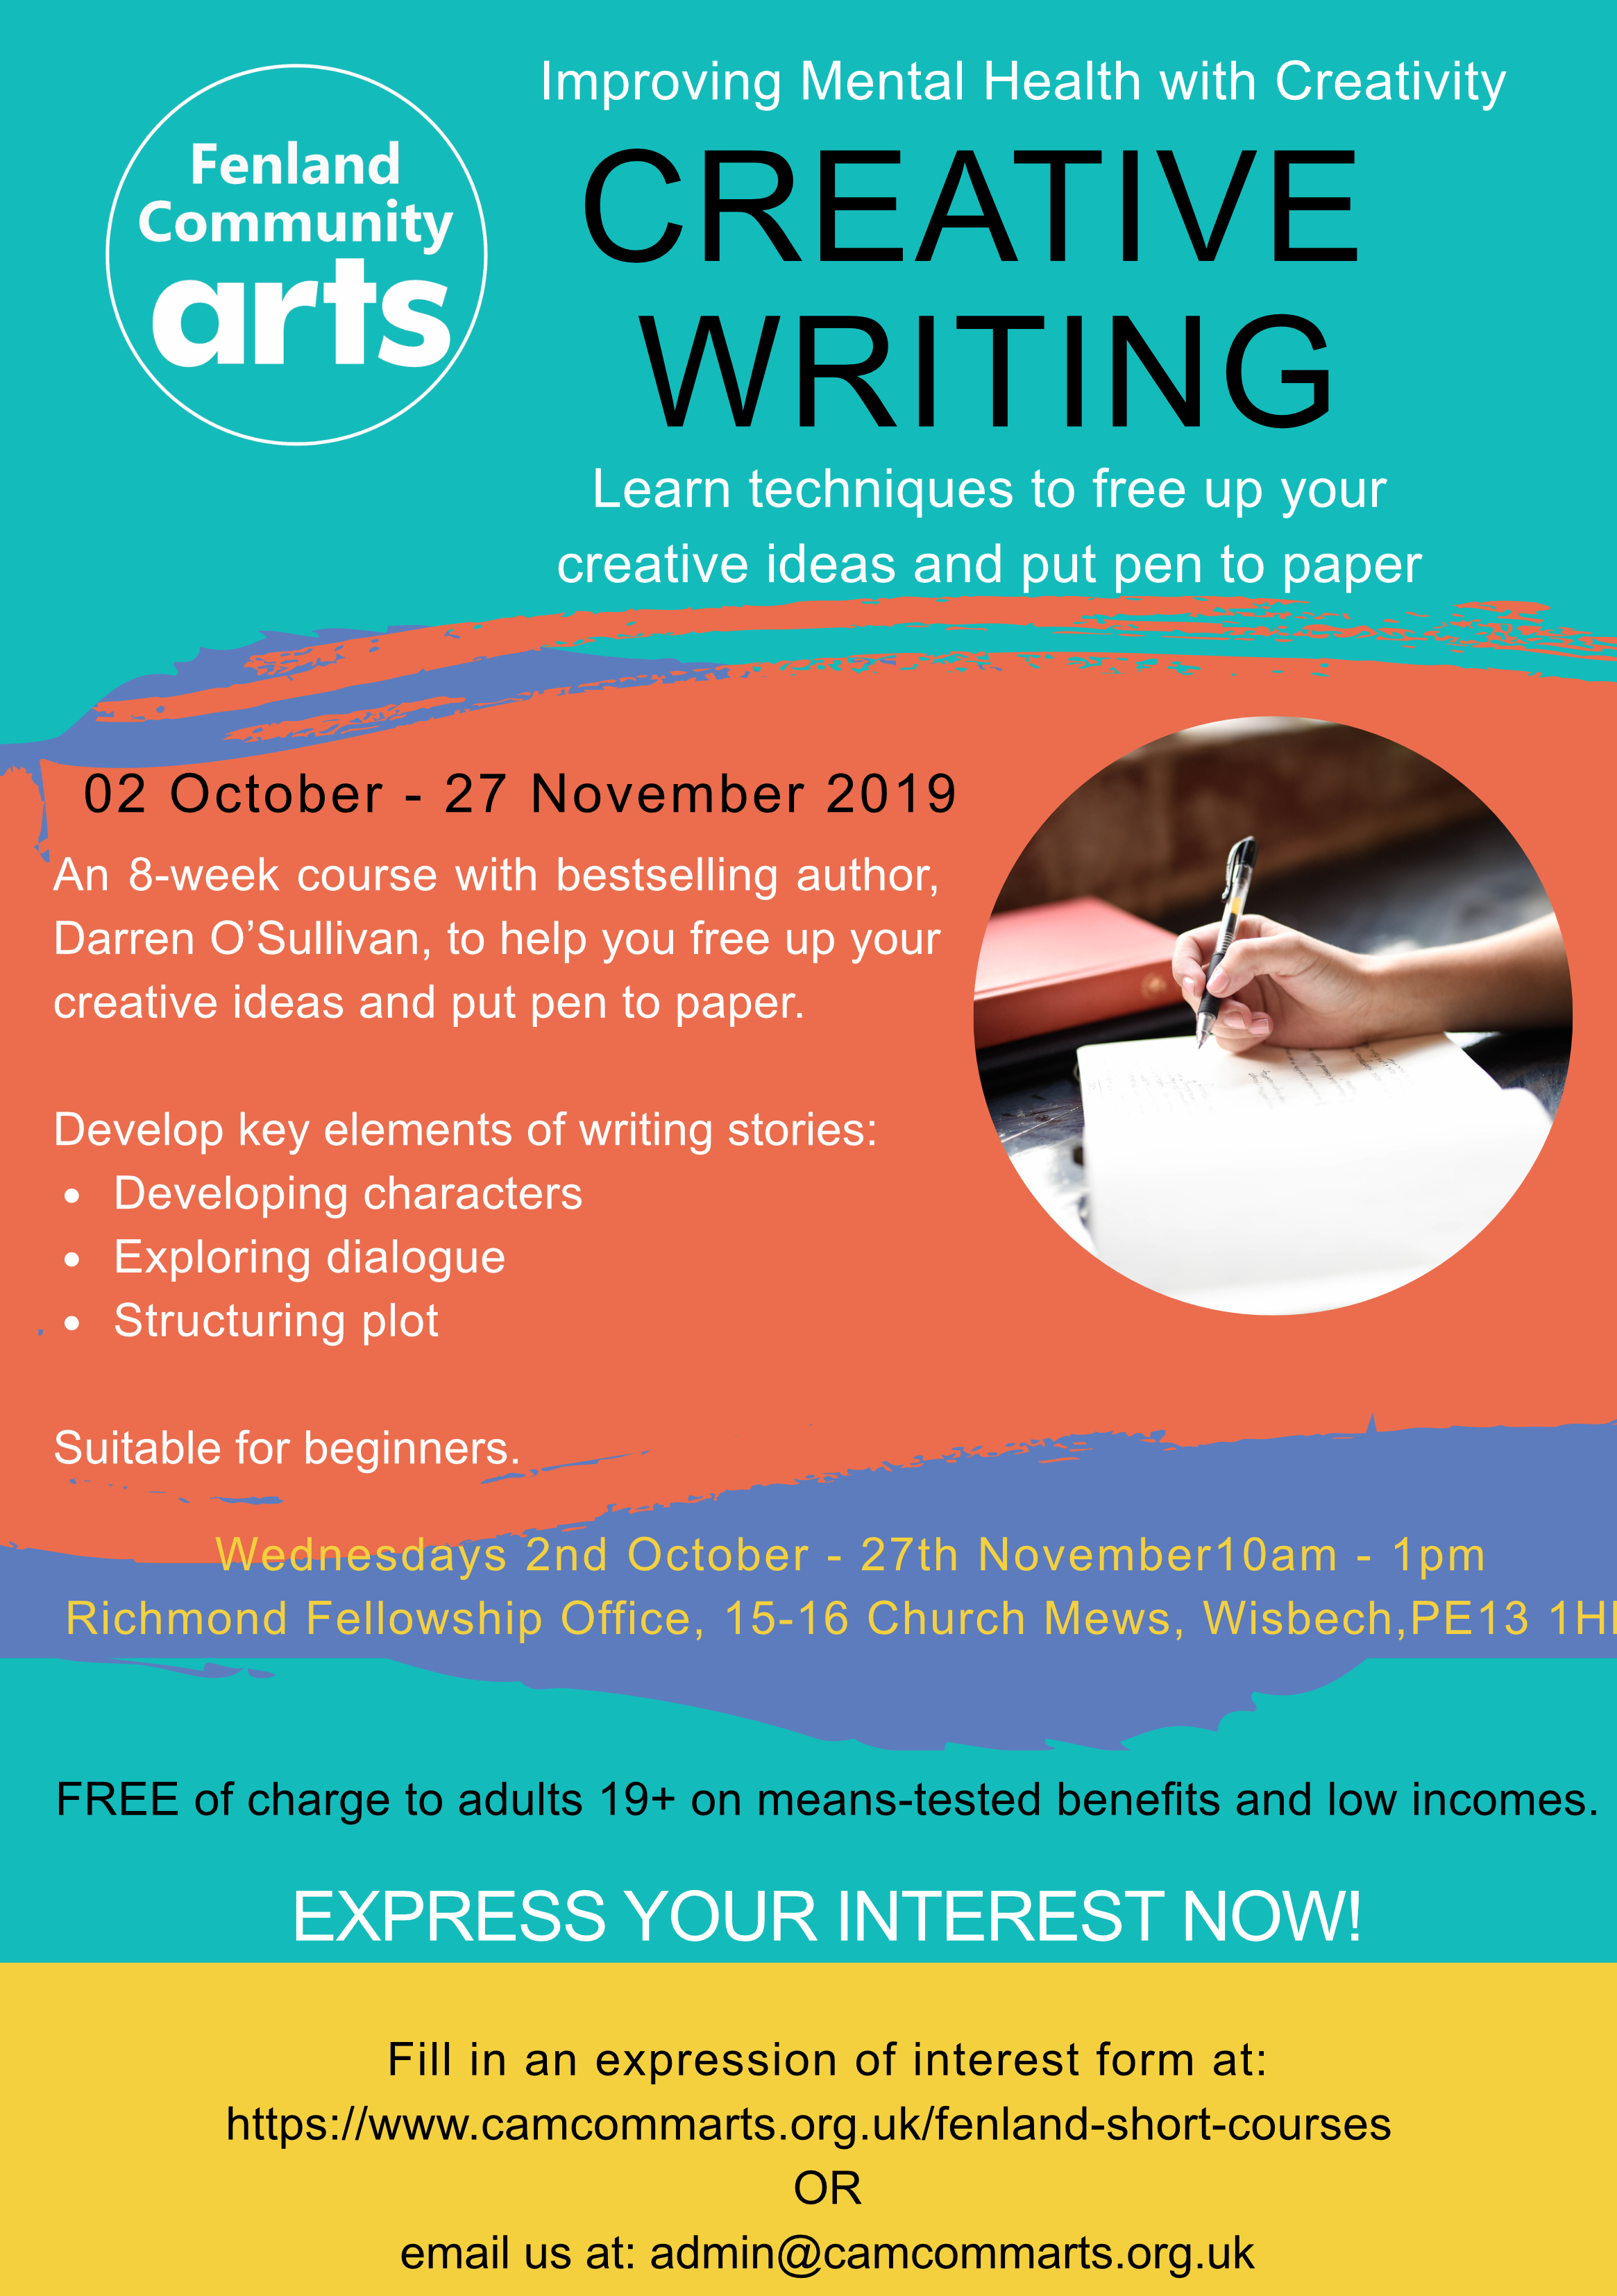 online course on creative writing